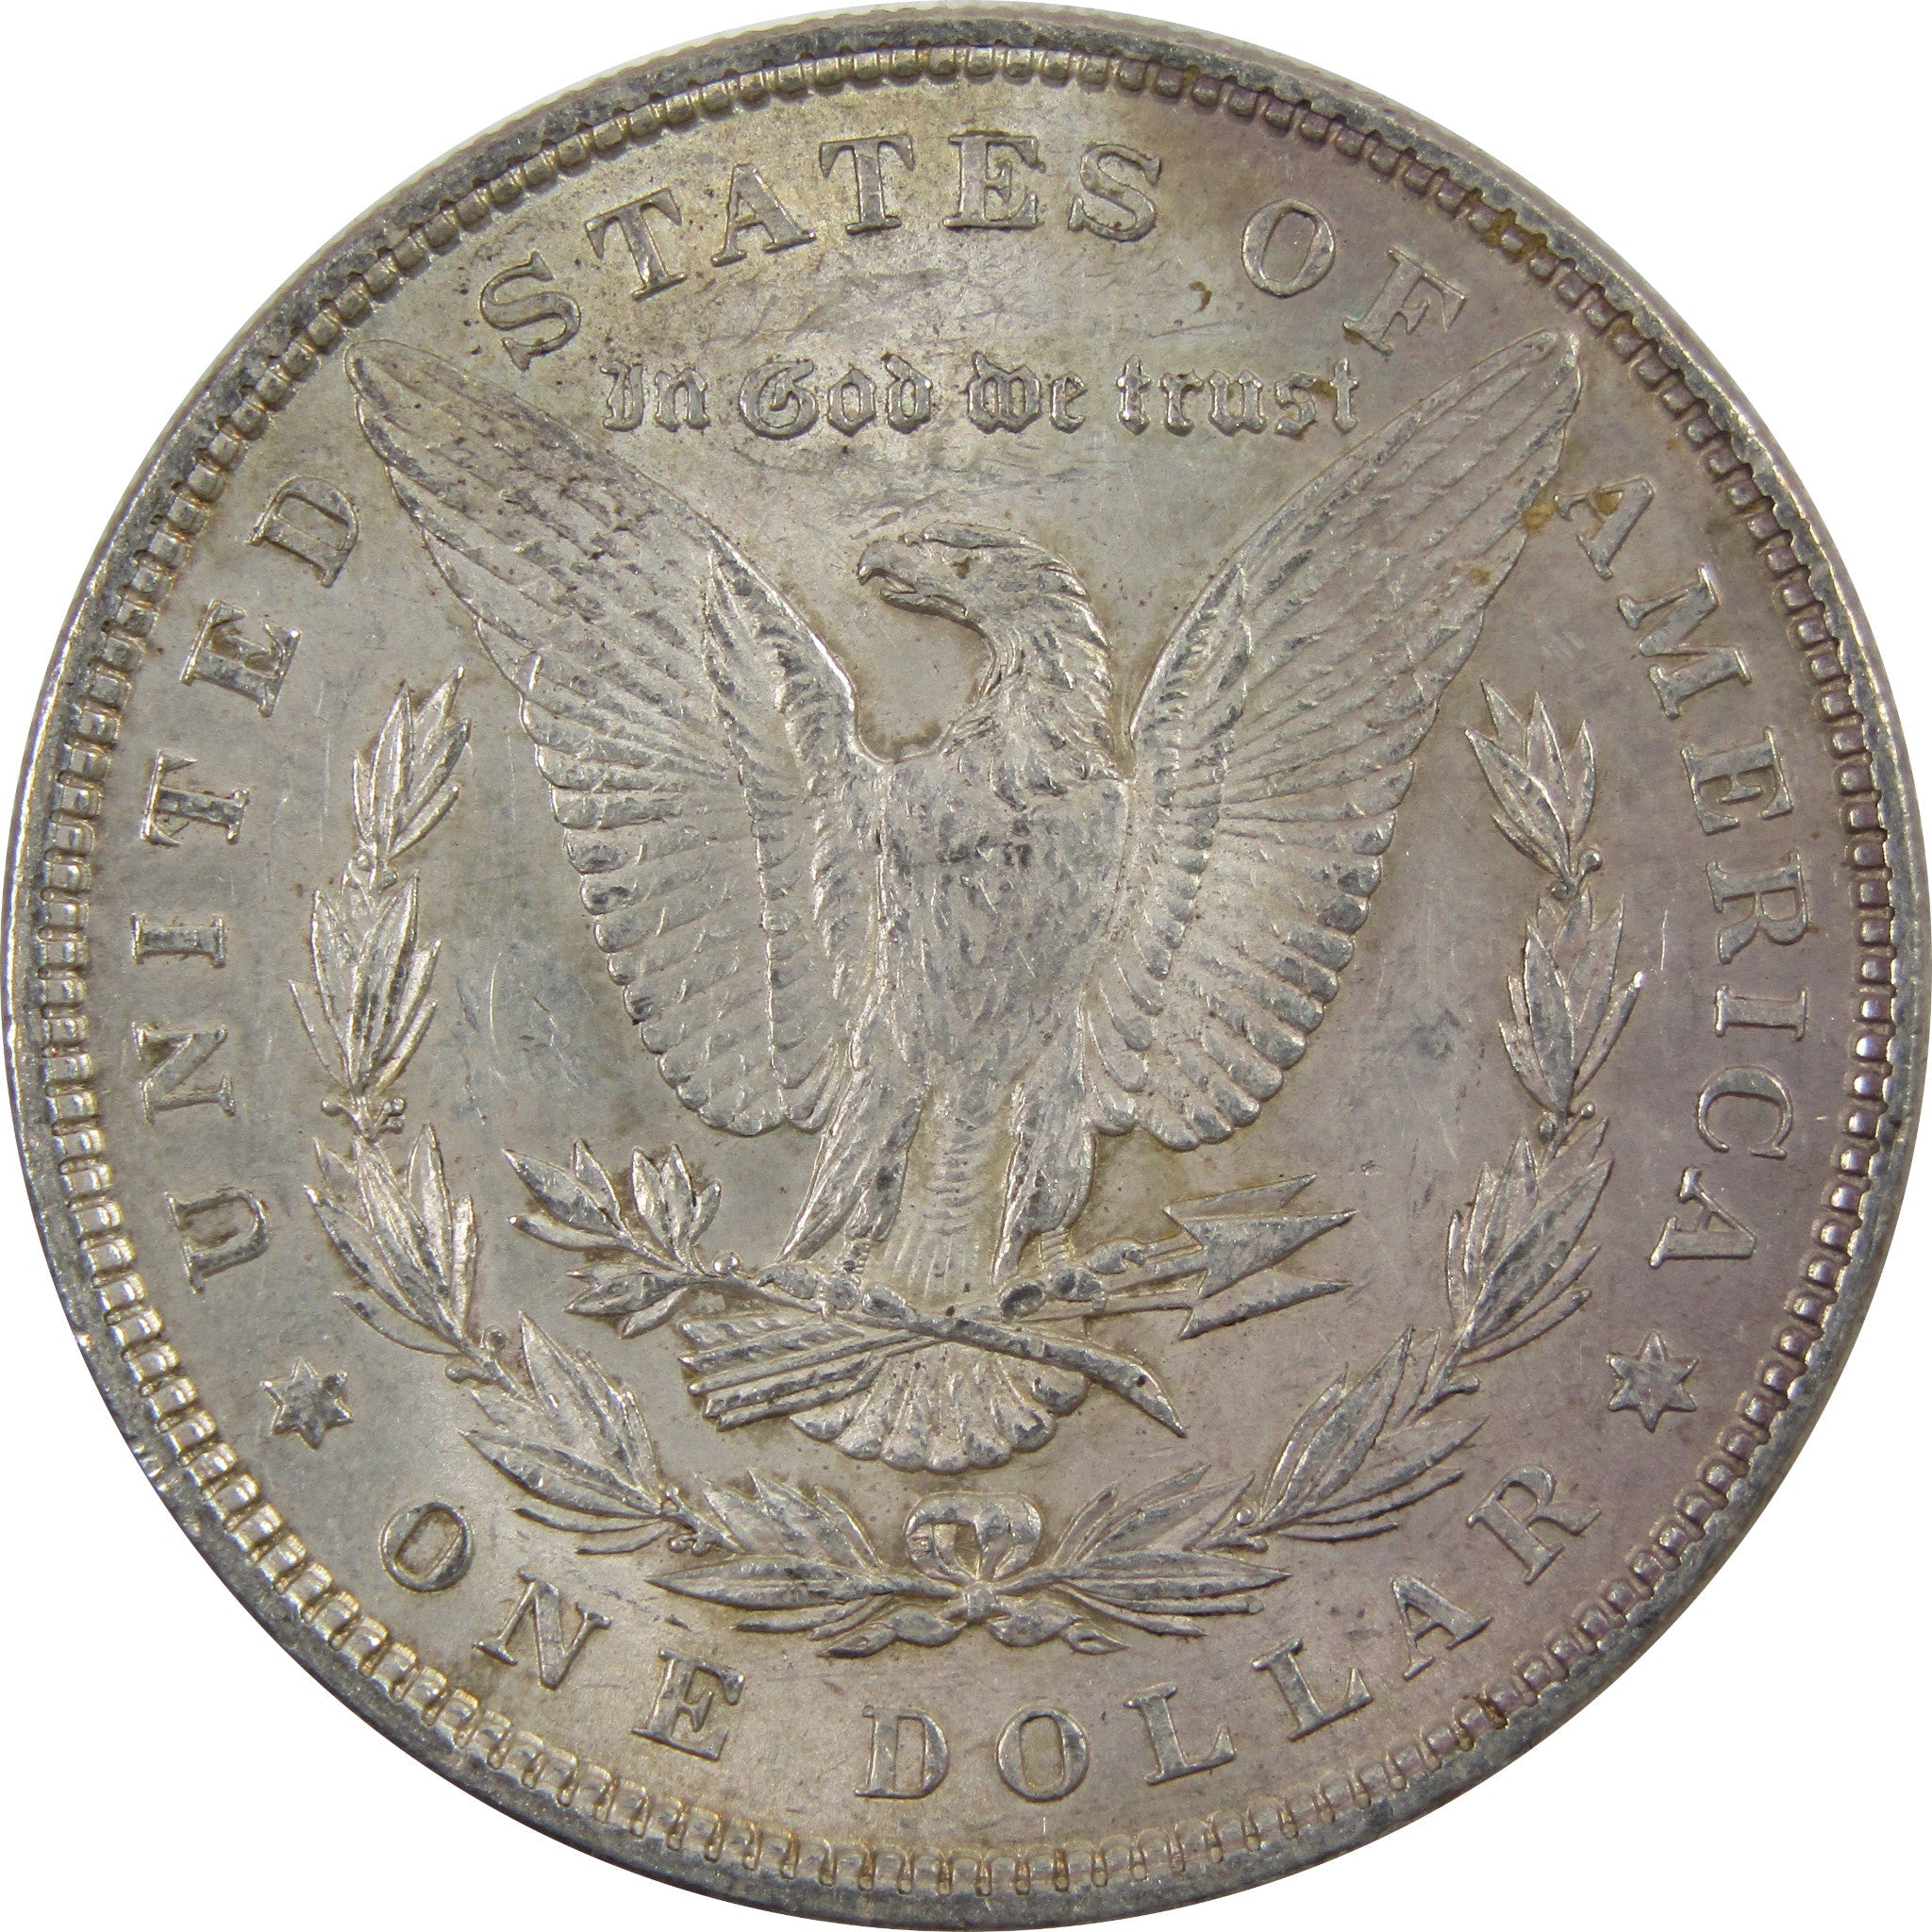 1896 Morgan Dollar AU About Uncirculated 90% Silver $1 Coin SKU:I5478 - Morgan coin - Morgan silver dollar - Morgan silver dollar for sale - Profile Coins &amp; Collectibles